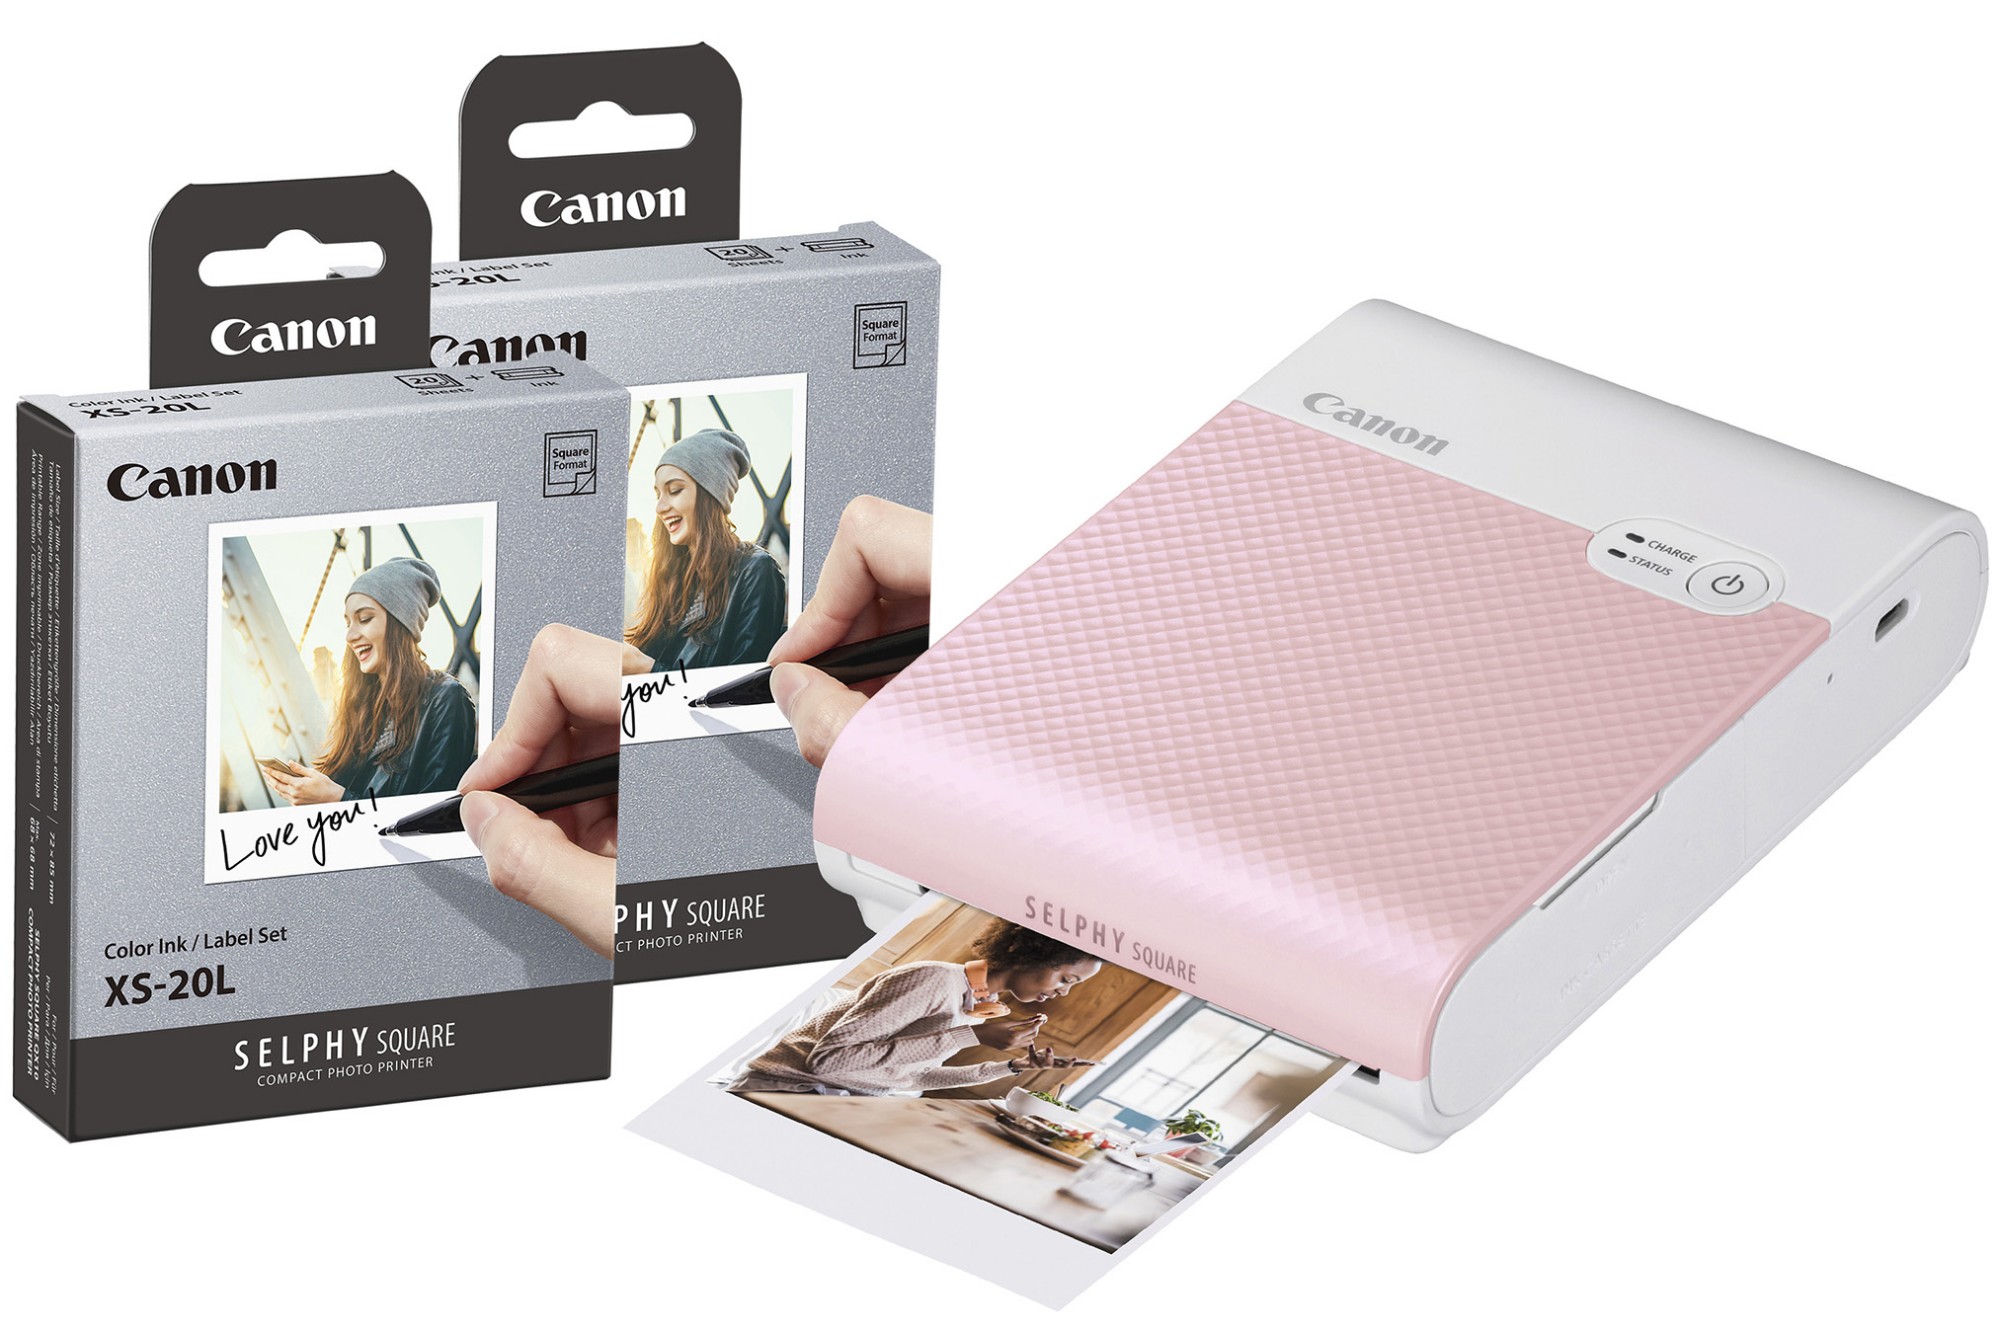 4109C003+4119C002x2 CANON Selphy Square QX10 Wireless Photo Printer including 40 Shots - Pink